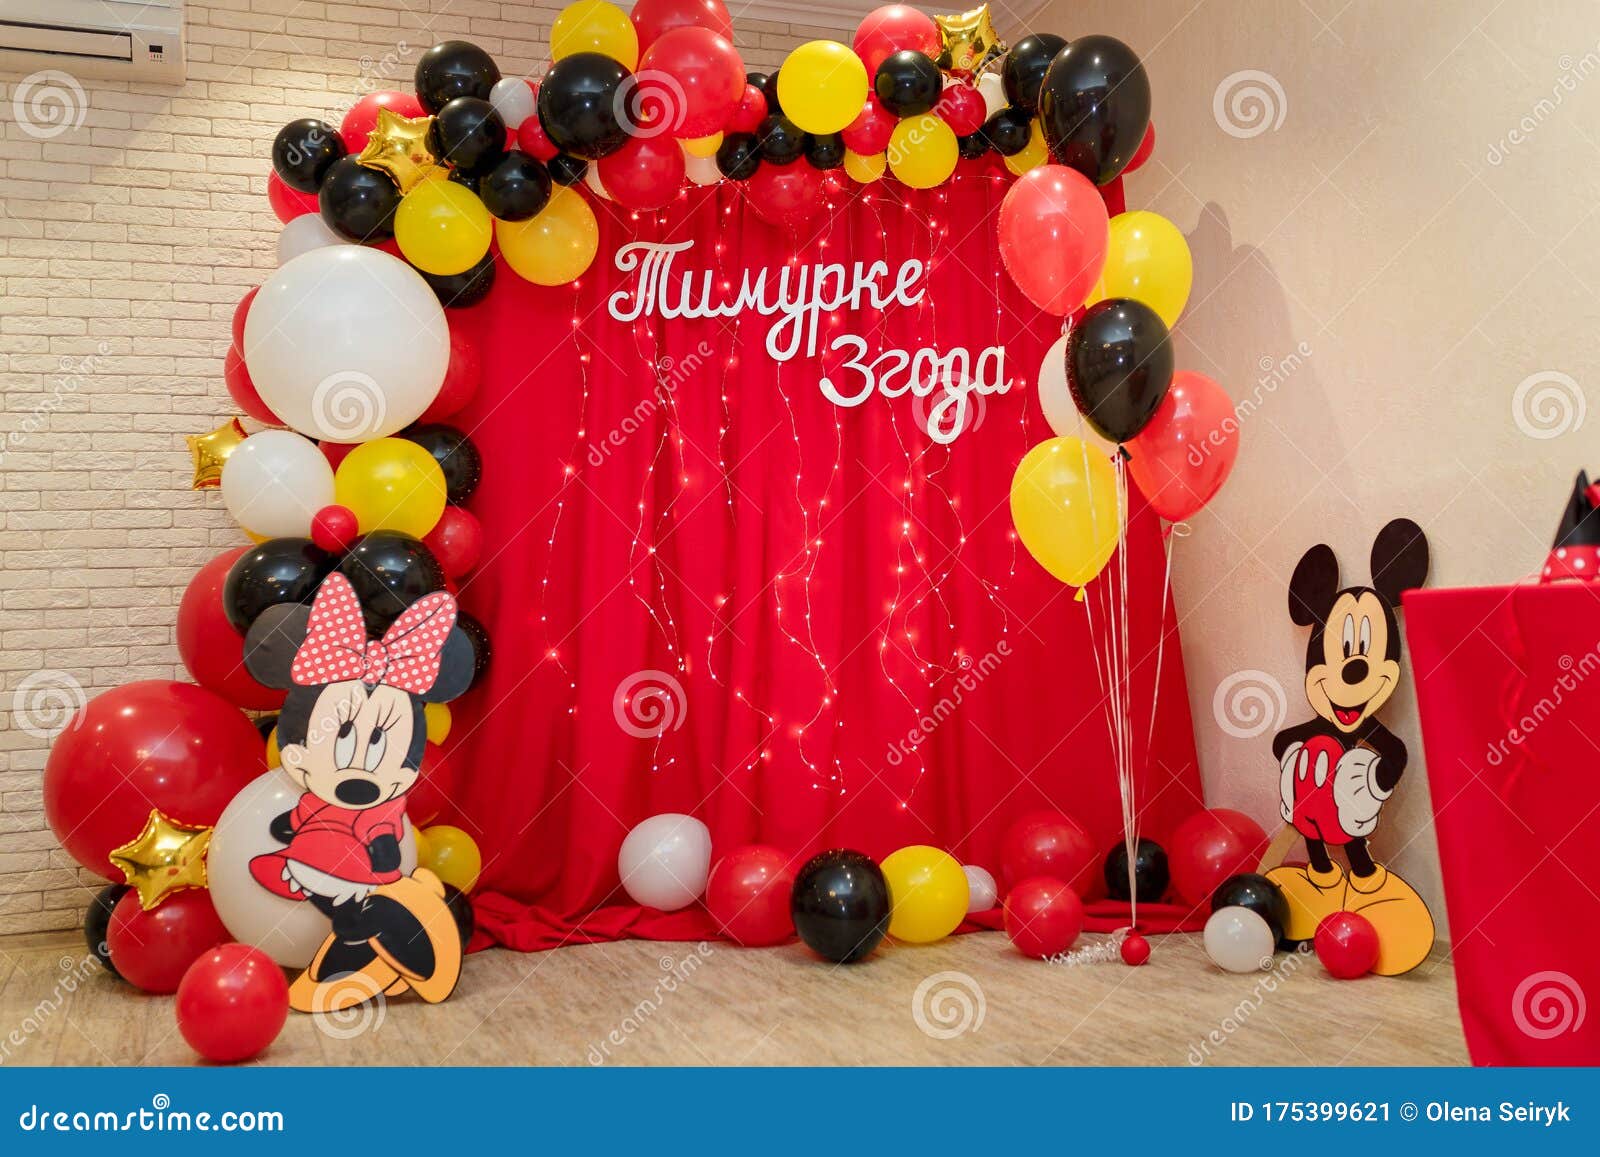 Mickey and Minnie Mouse Party. Decorations with Walt Disney Cartoon and  Balloons for Children Editorial Photo - Image of decorations, cute:  175399621